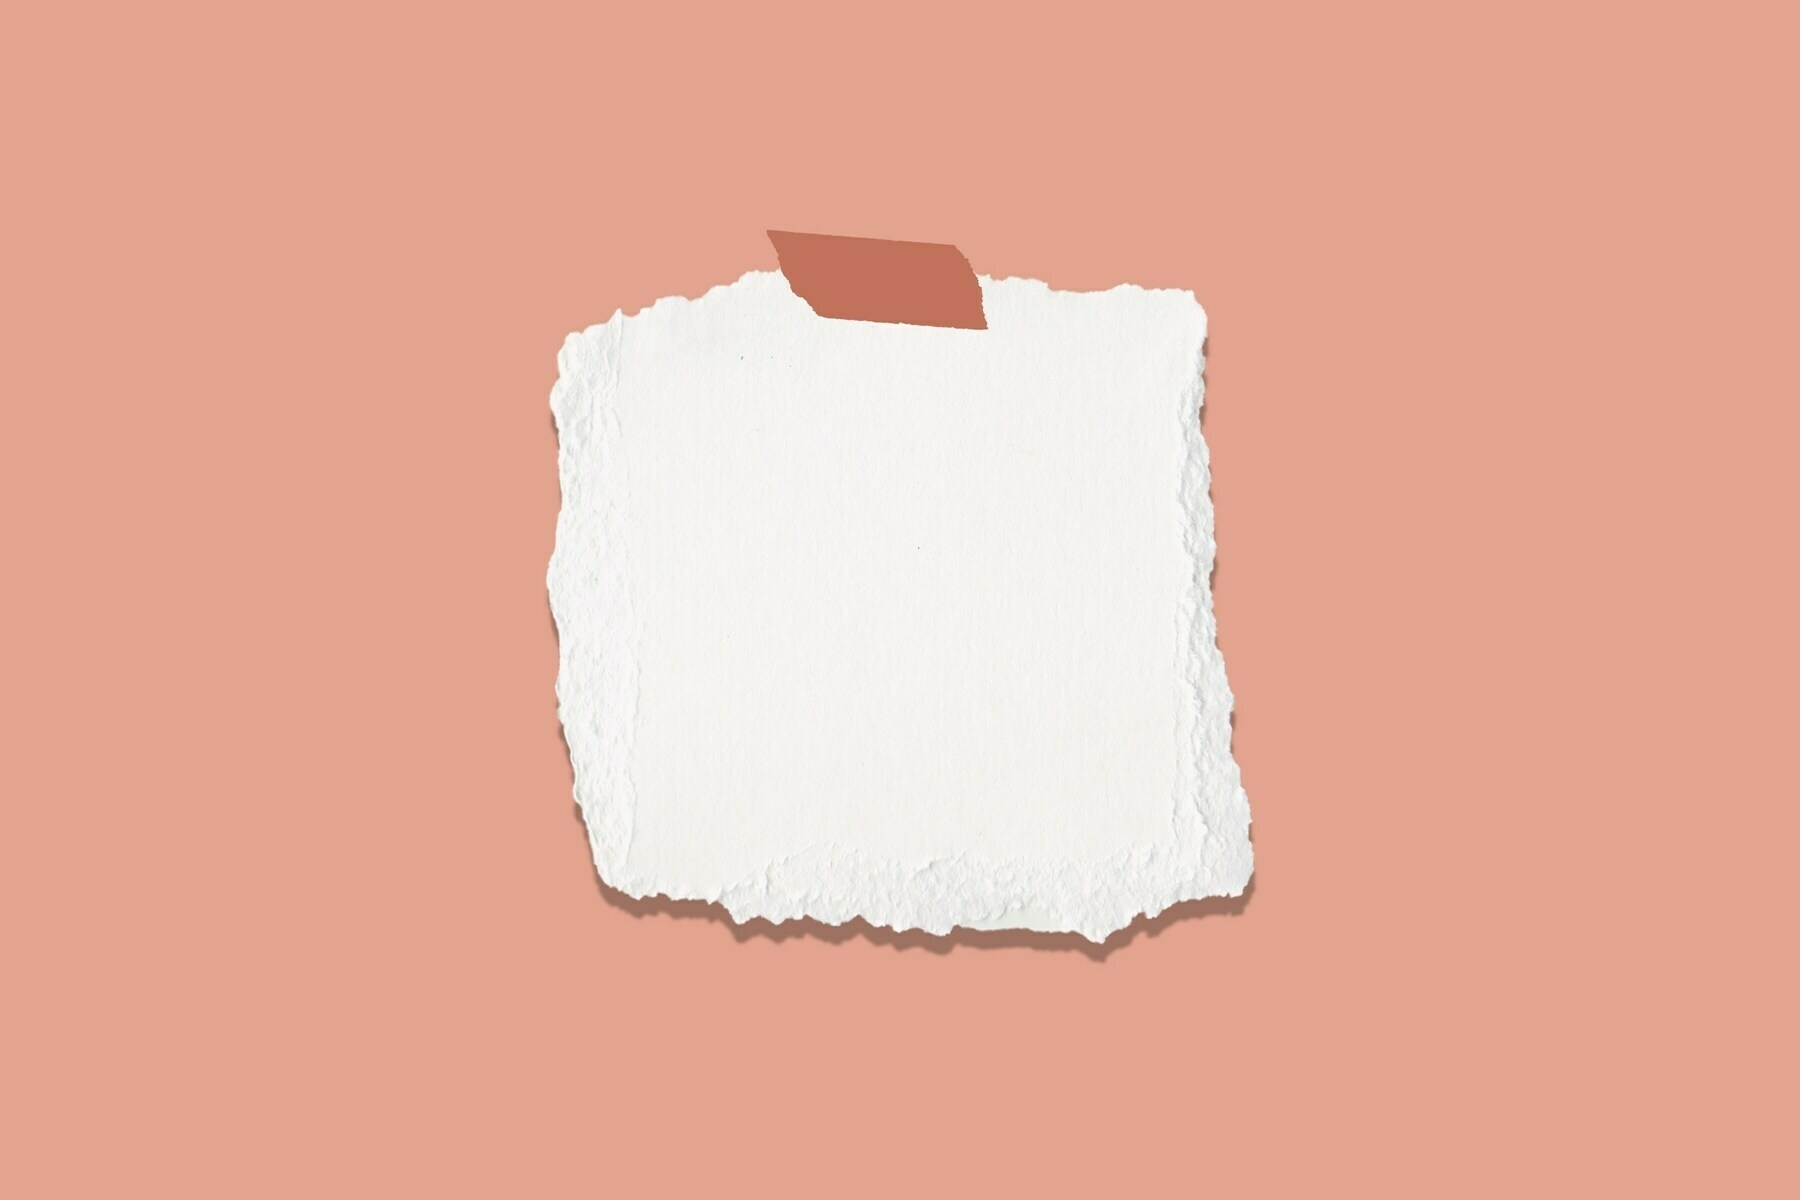 A piece of textured white paper with rough edges taped onto a soft peach background.